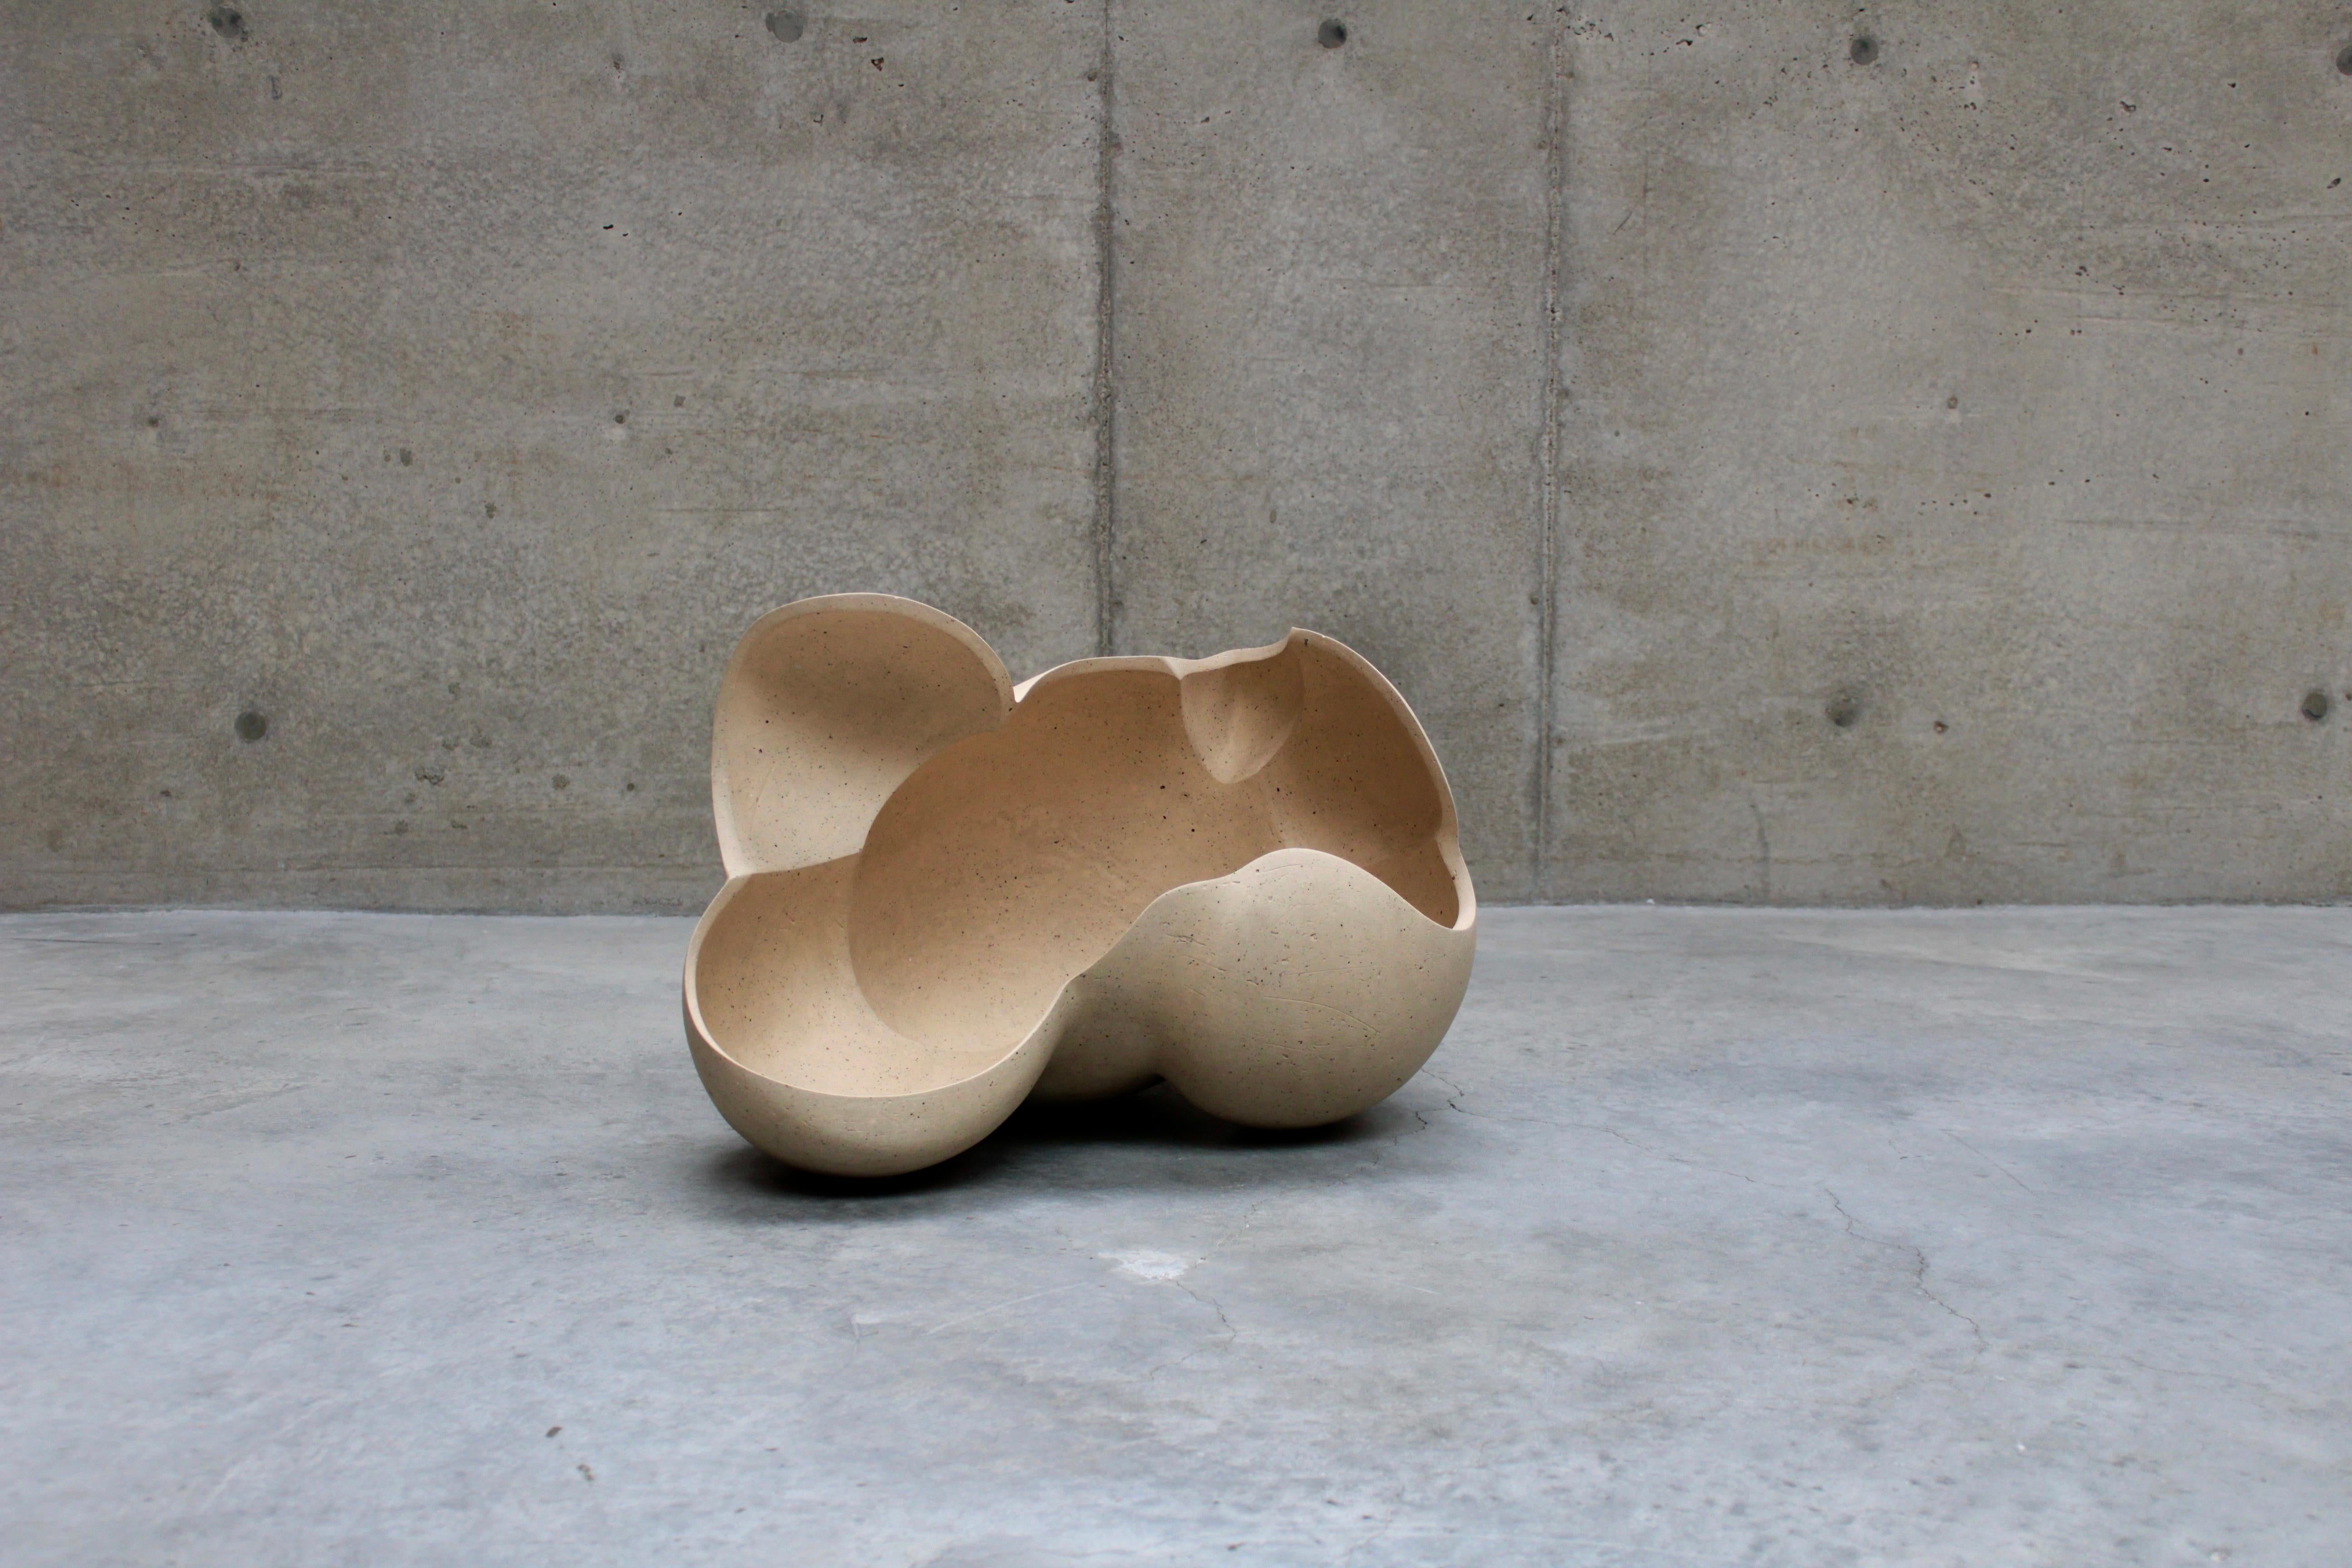 Title: Magnolia 01 
Year: 2021
Artist: Zoë Powell

Large, free-form ceramic sculpture made from a blend of white stoneware clays hand-collected by the artist in Minnesota. The surface is hand-polished with diamond sandpaper to render a matte